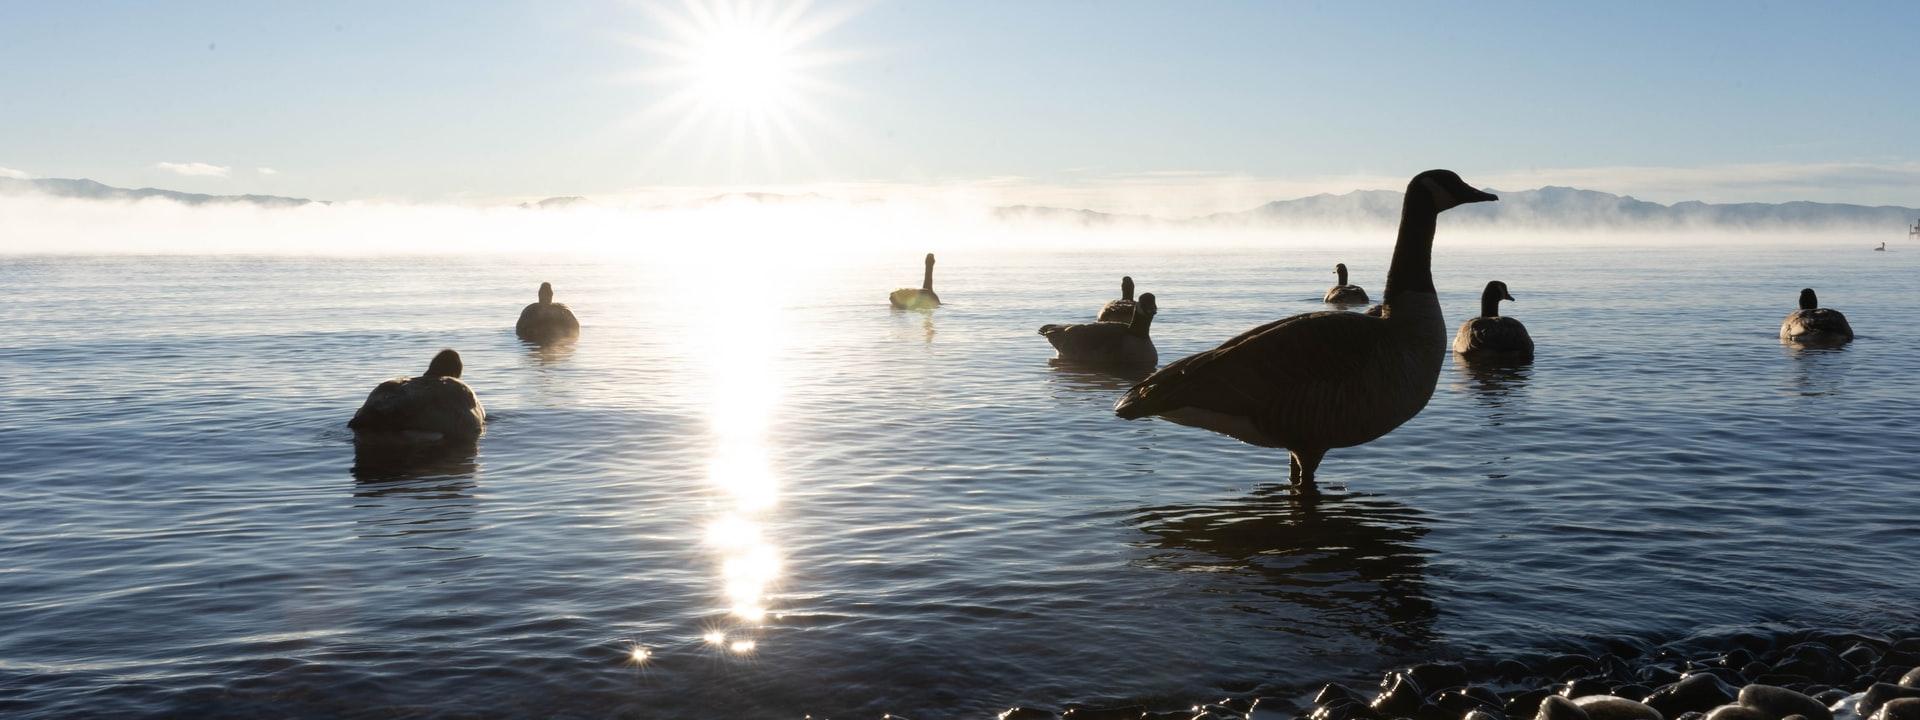 Geese in the water with the sun shining on the horizon